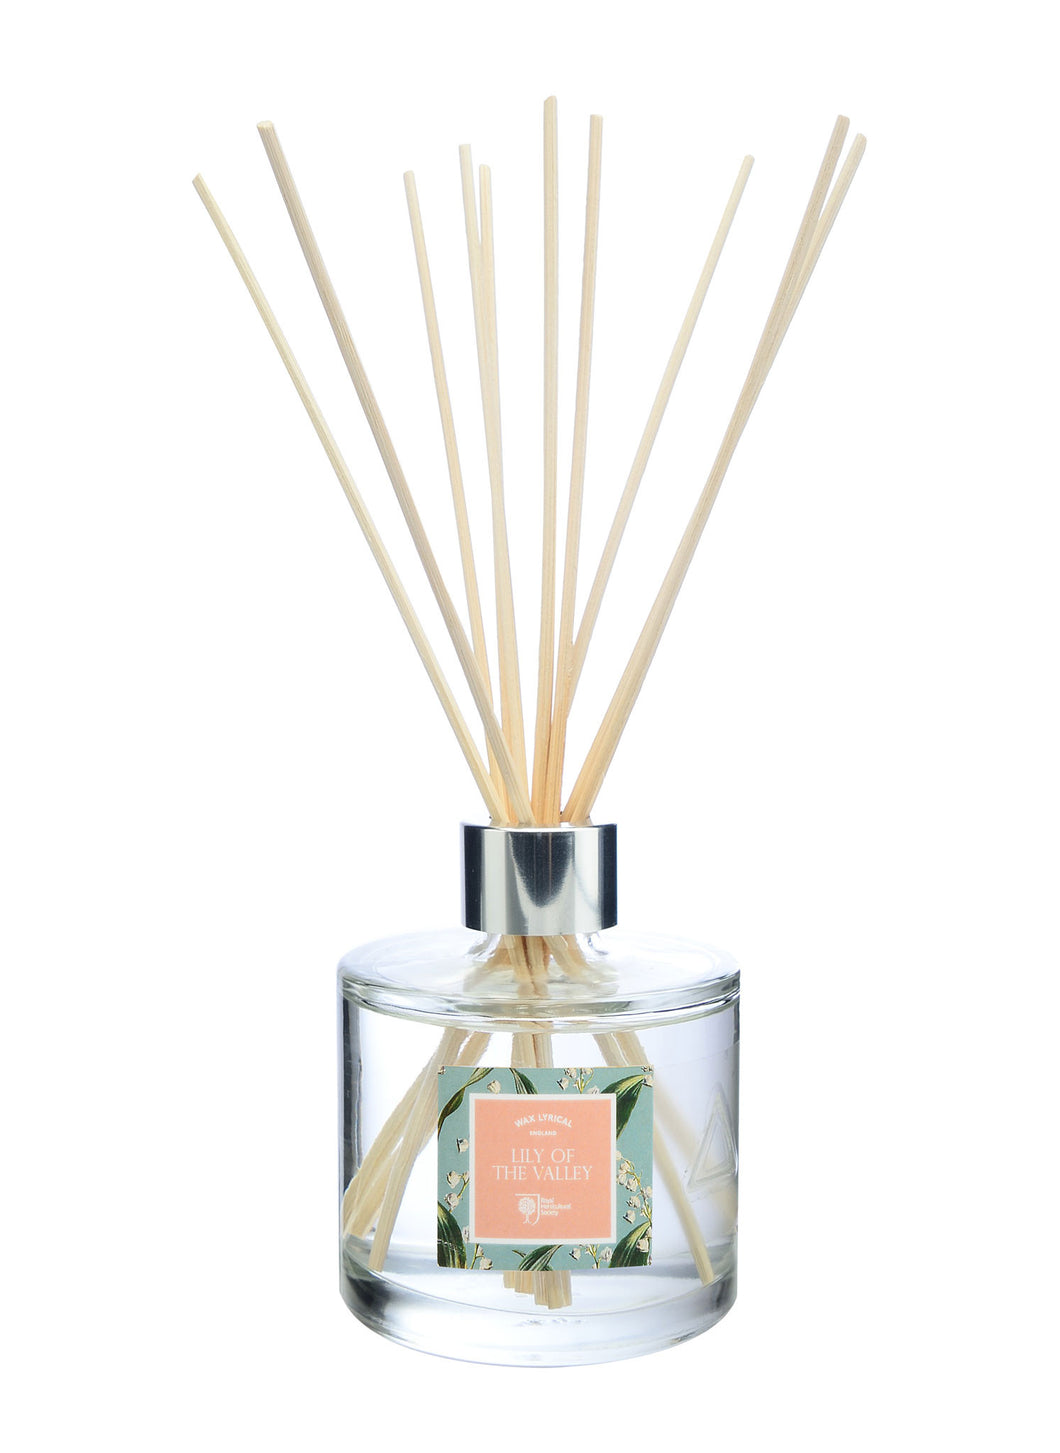 Wax Lyrical RHS Fragrant Garden 200ml Reed Diffuser Lily of the Valley - LAST FEW AVAILABLE!